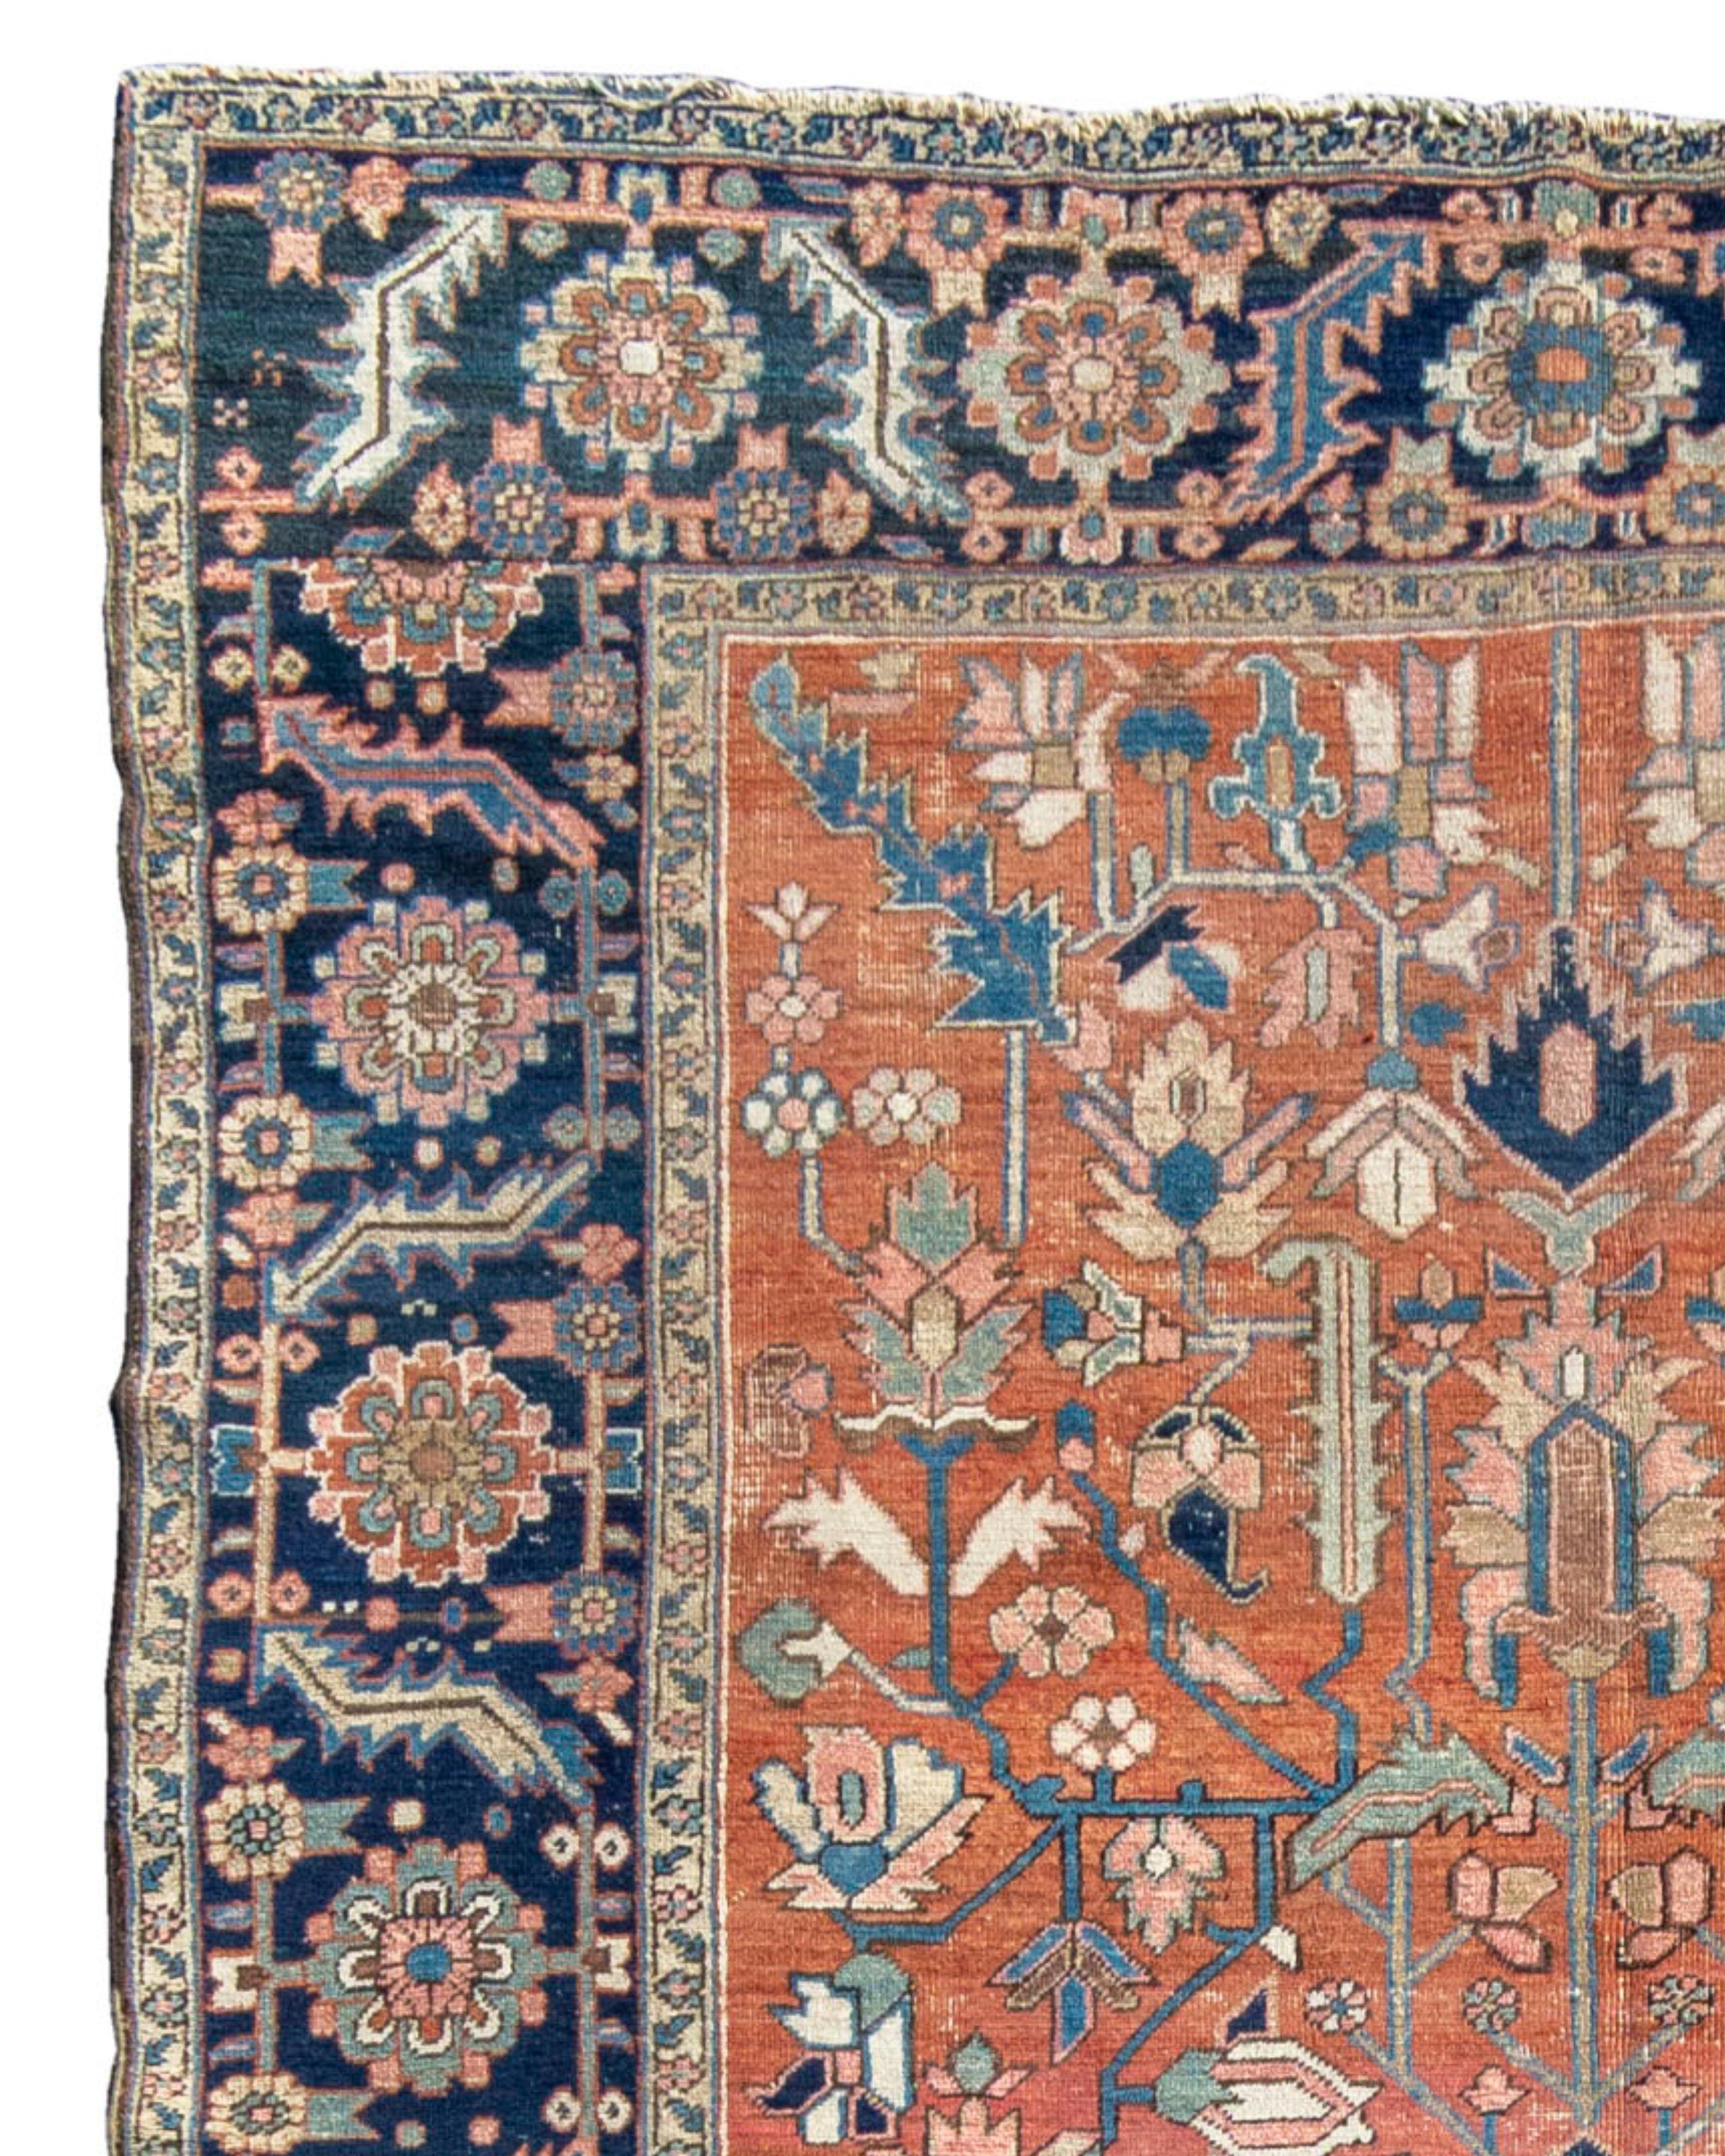 Hand-Knotted Antique Persian Bakhshaish Rug, Early 20th Century For Sale